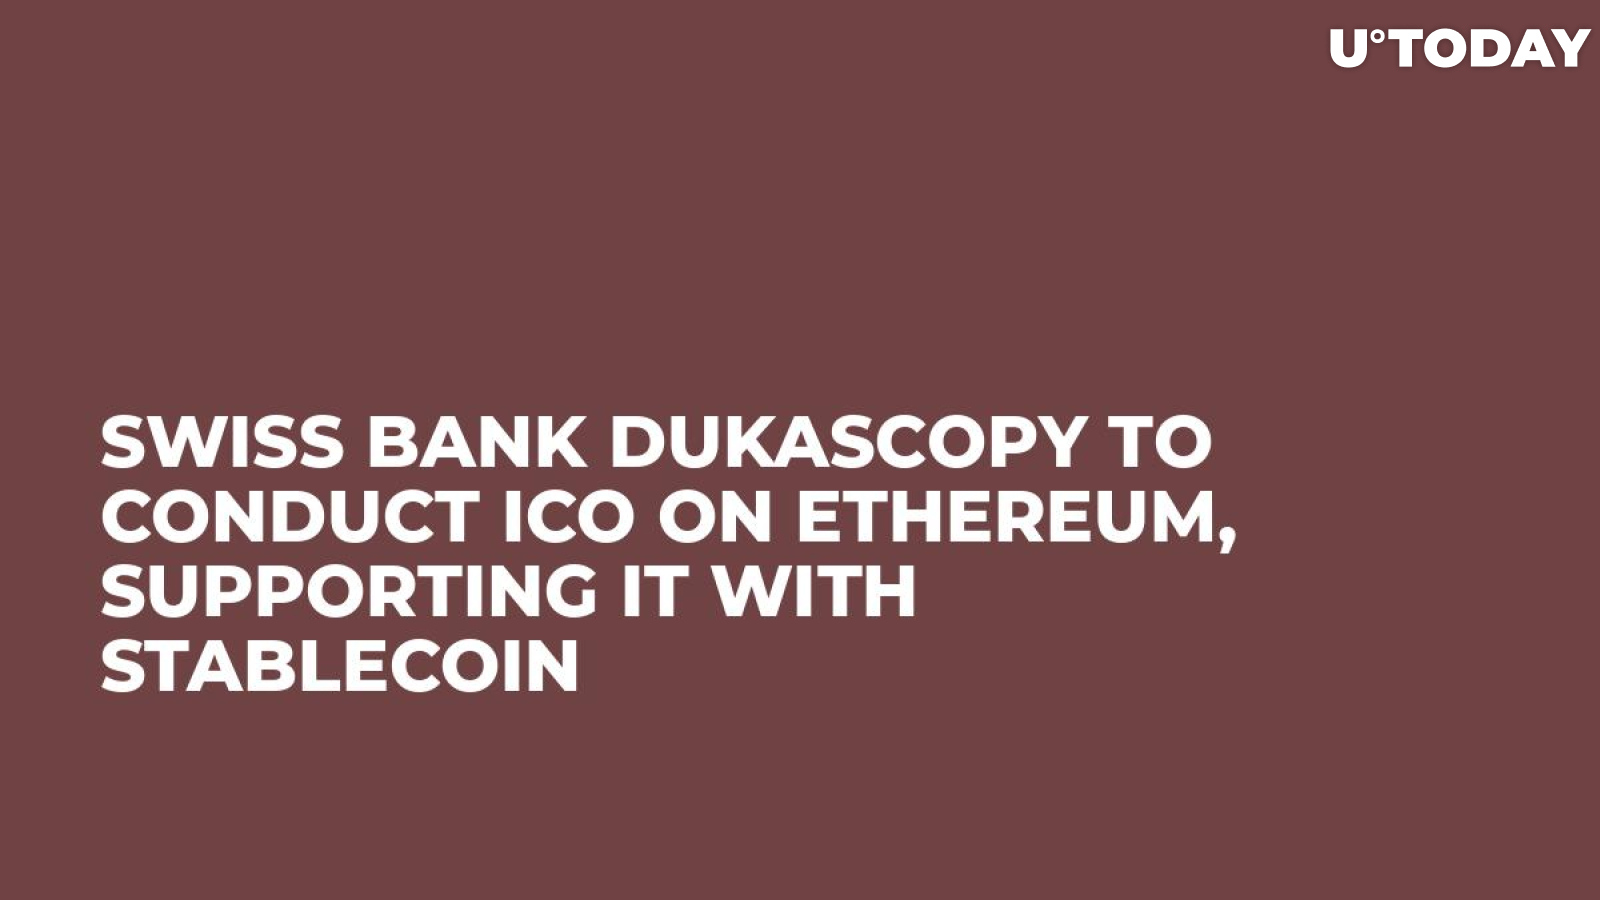 Swiss Bank Dukascopy to Conduct ICO on Ethereum, Supporting It With Stablecoin